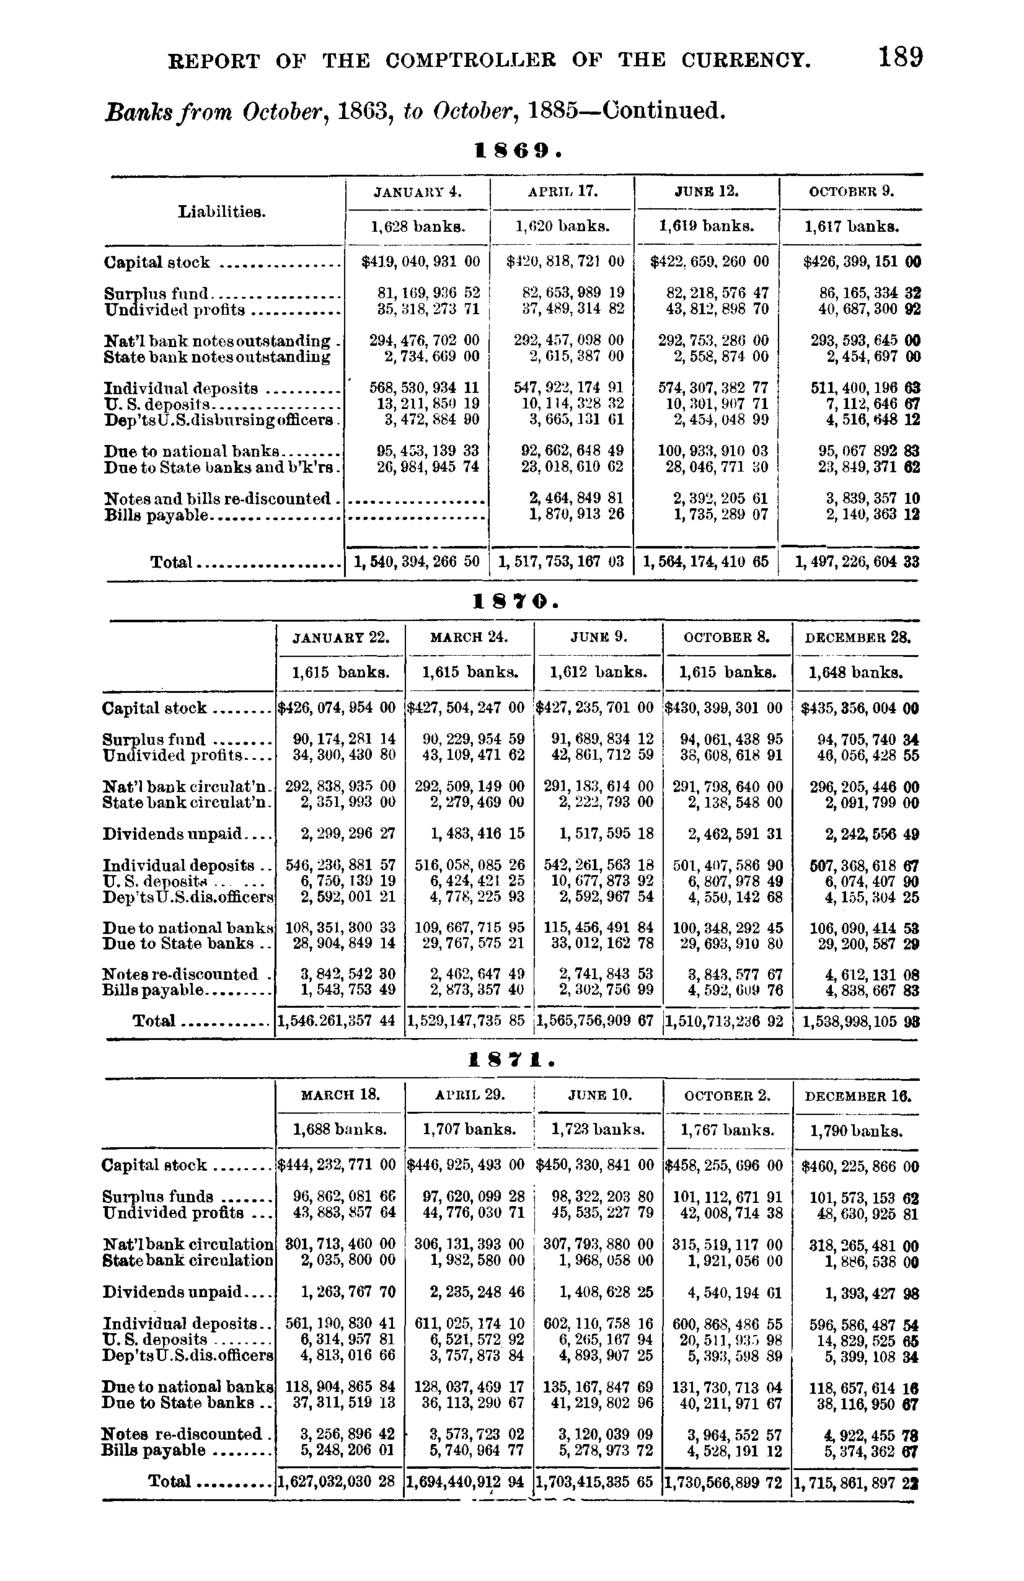 REPORT OF THE COMPTROLLER OF THE CURRENCY. 189 BanTcsfrorn October, 1863, to October, 1885 Continued. l 69. Liabilities. JANUARY 4. 1,628 banks. APRIL 17. 1,620 banks. JUNE 12. 1,619 banks. OCTOBER 9.